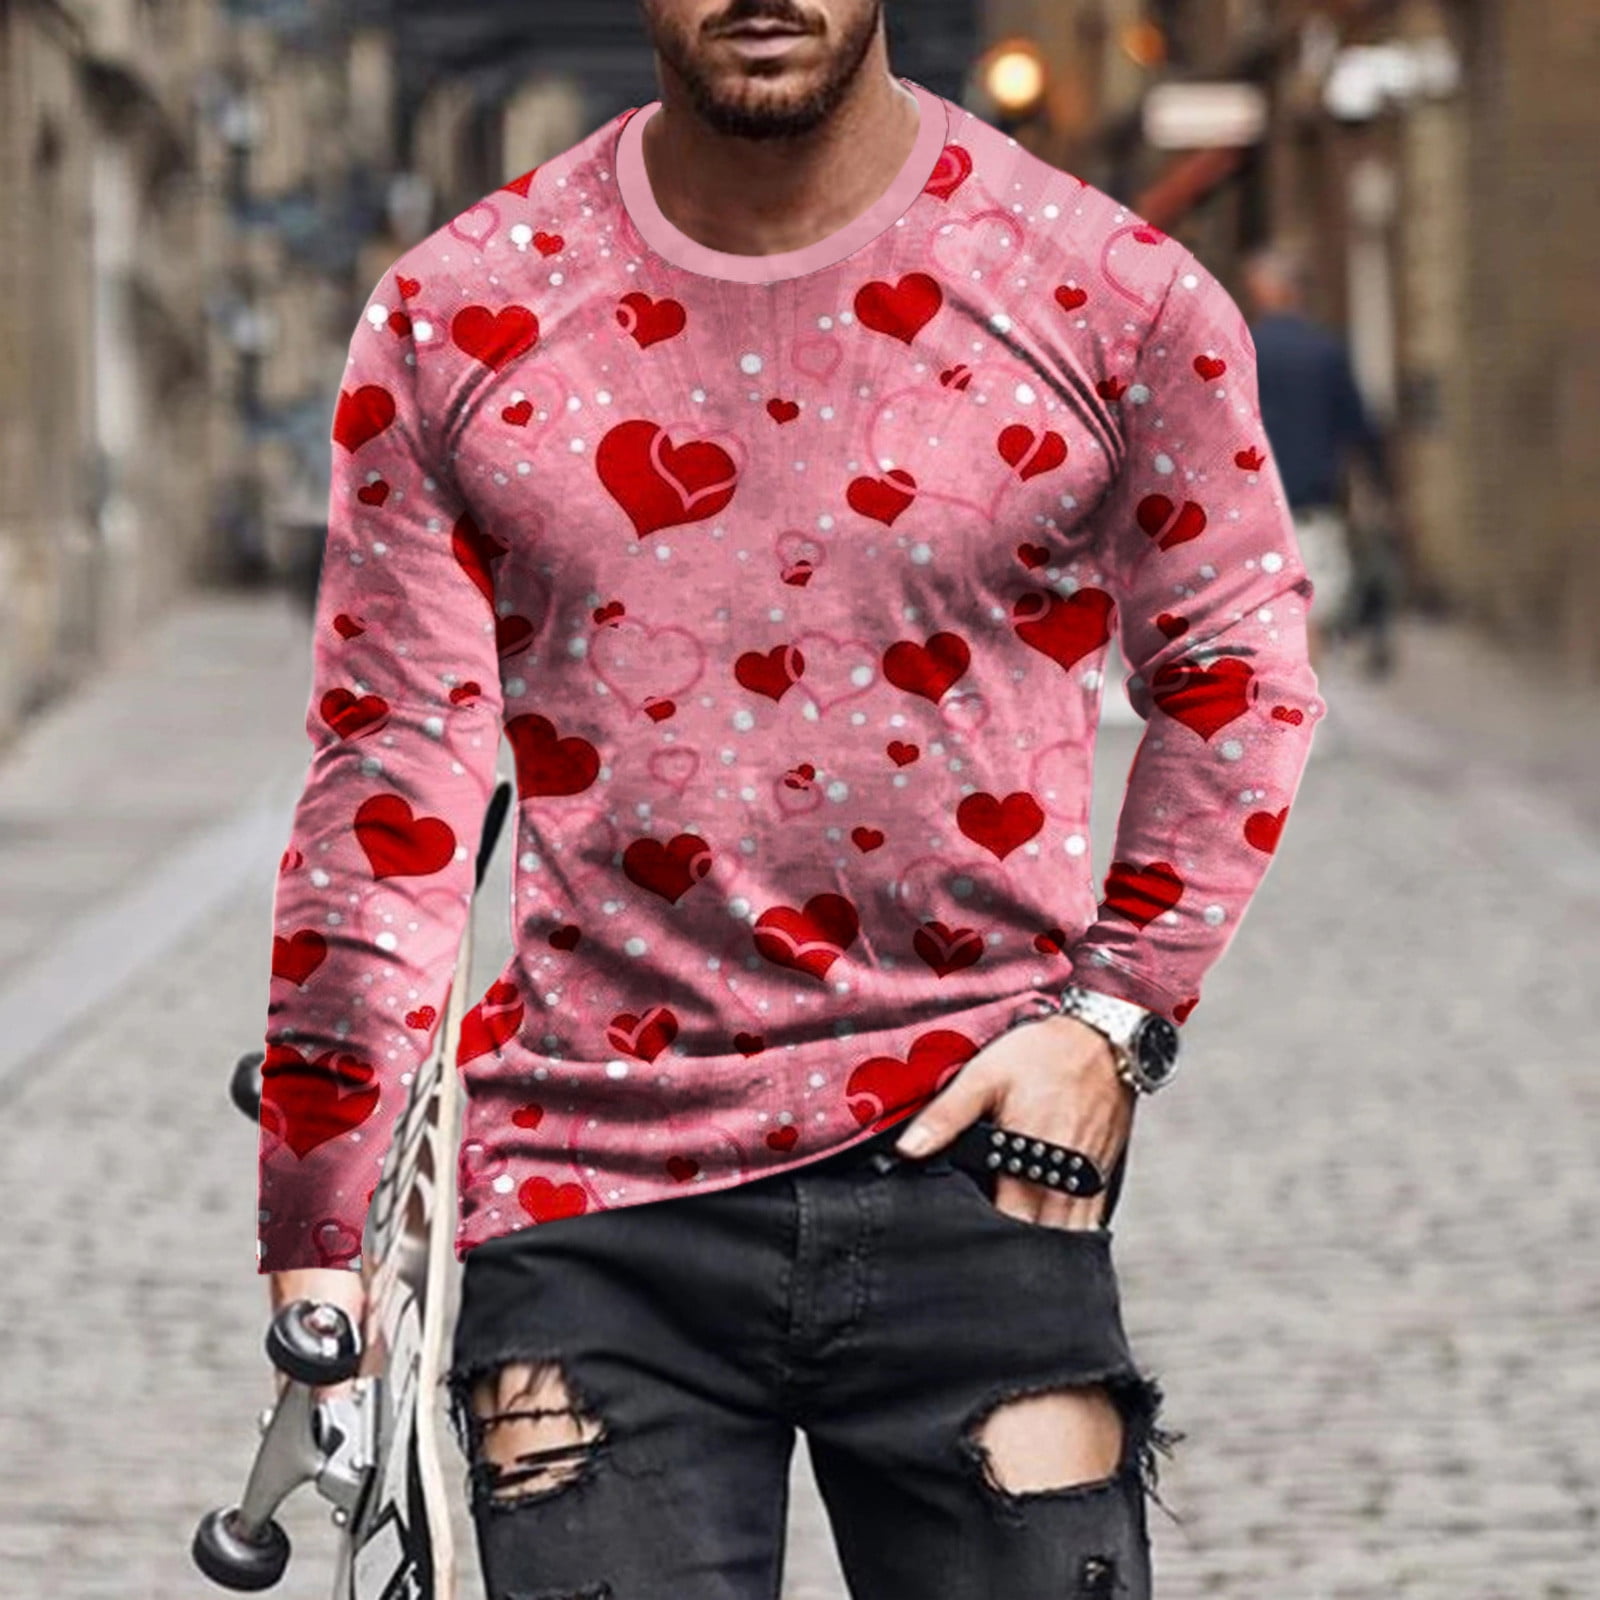 jsaierl Mens Shirts Long Sleeve Heart Print Tee Big & Tall Casual Crew Neck Tops Novelty Trendy T Shirts for Valentine's Day - Walmart.com